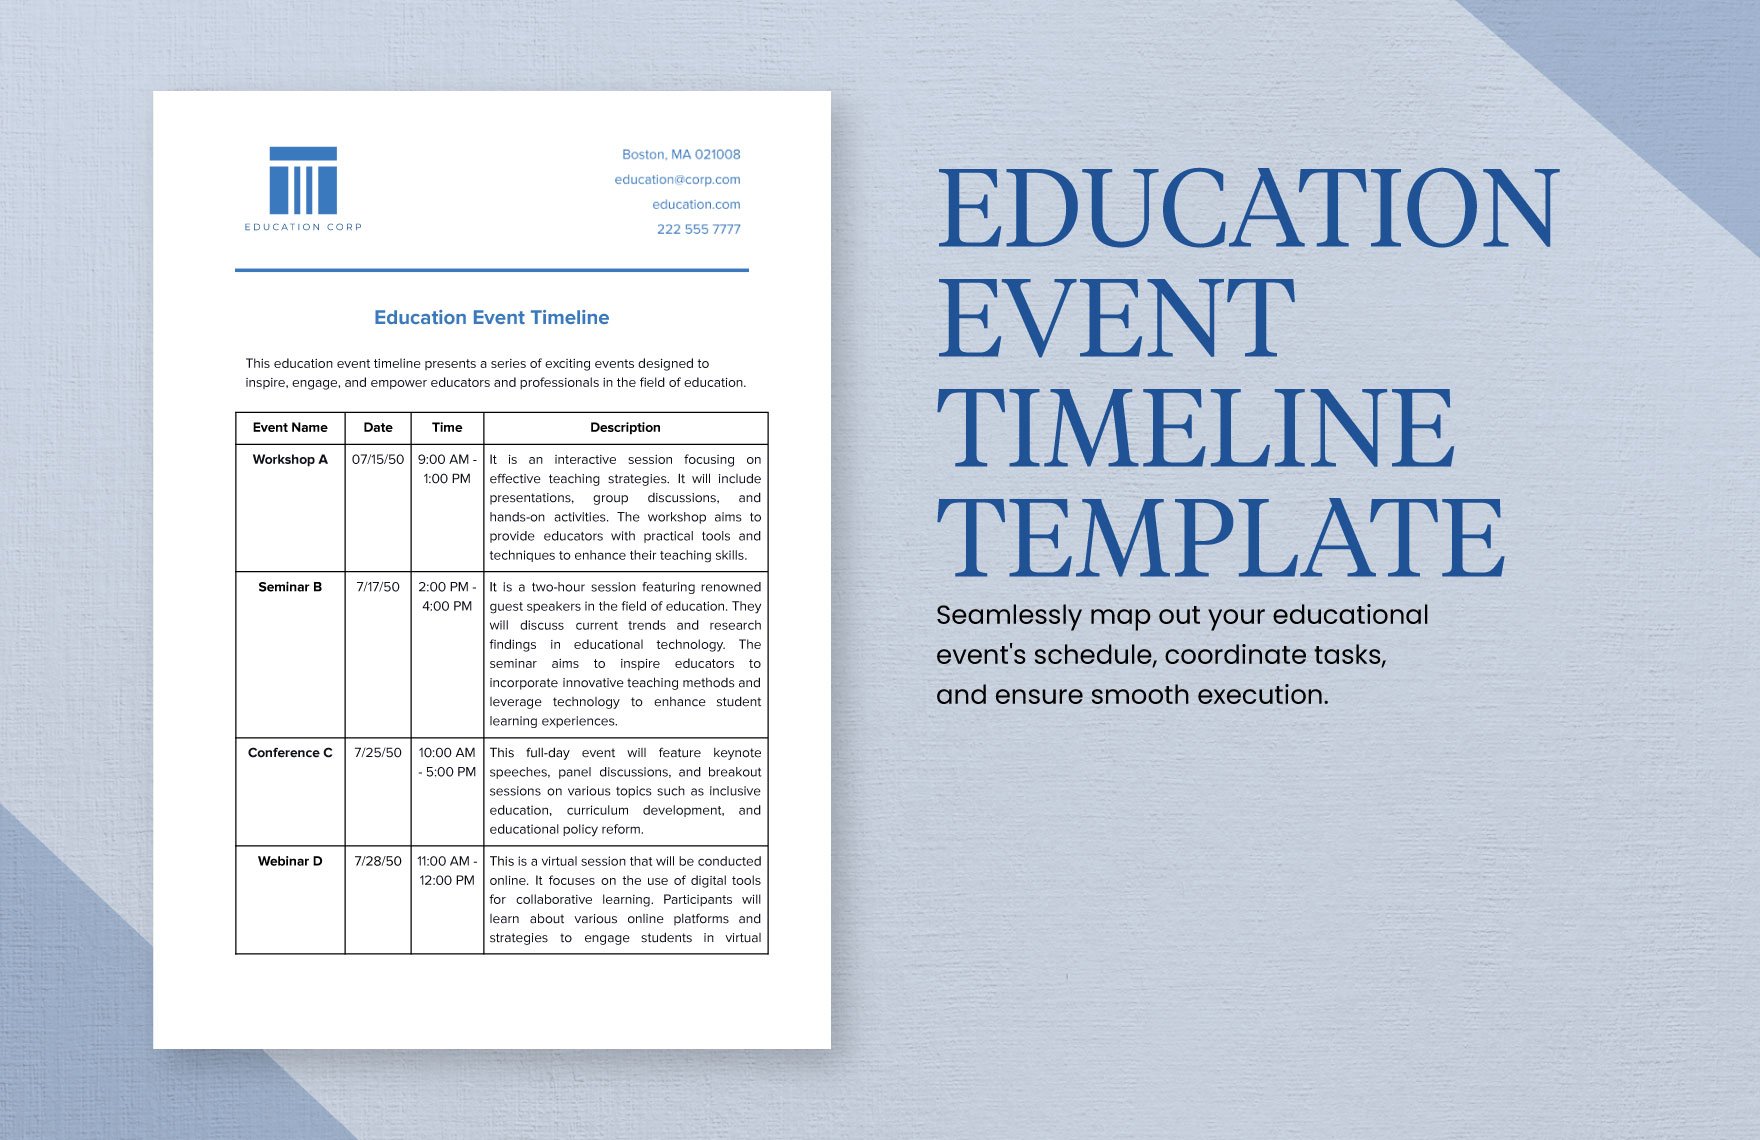 Education Event Timeline Template in Word, Google Docs, PDF